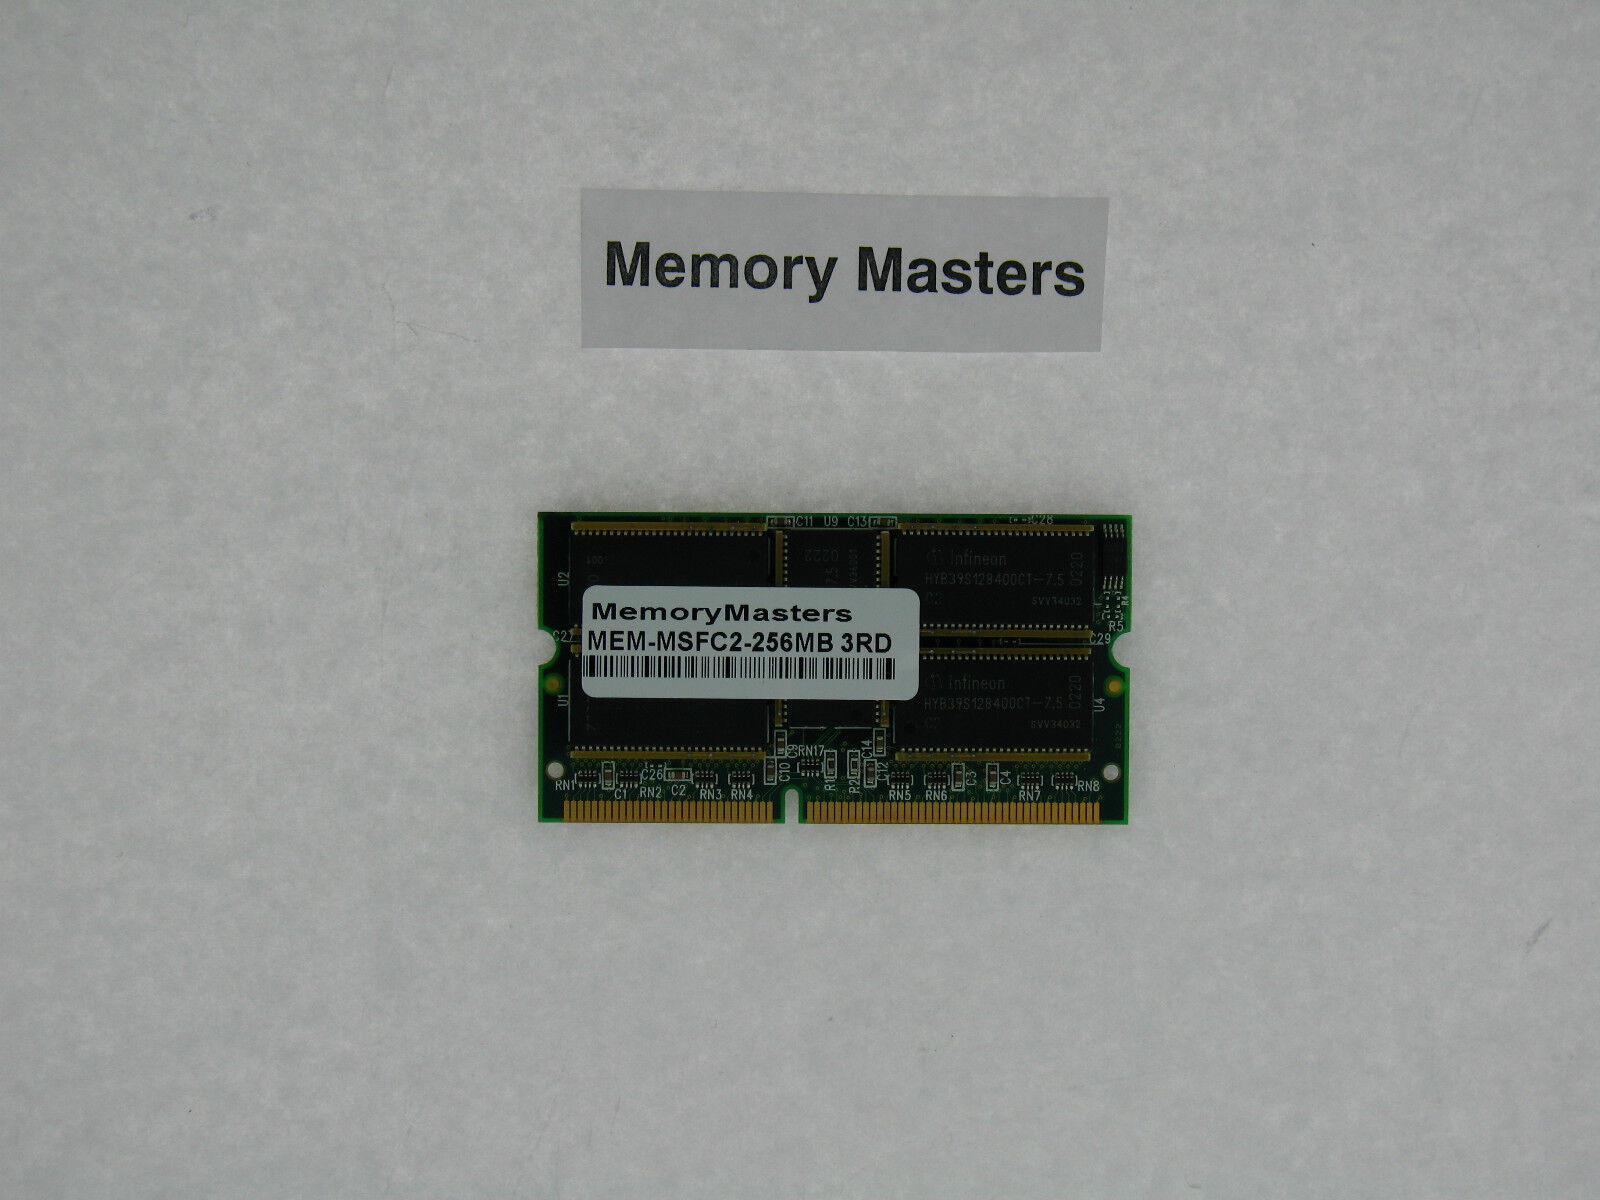 MEM-MSFC2-256MB 256MB Memory for Cisco MSFC2 Max 61% Dealing full price reduction OFF 6000 Pa 6500 Third